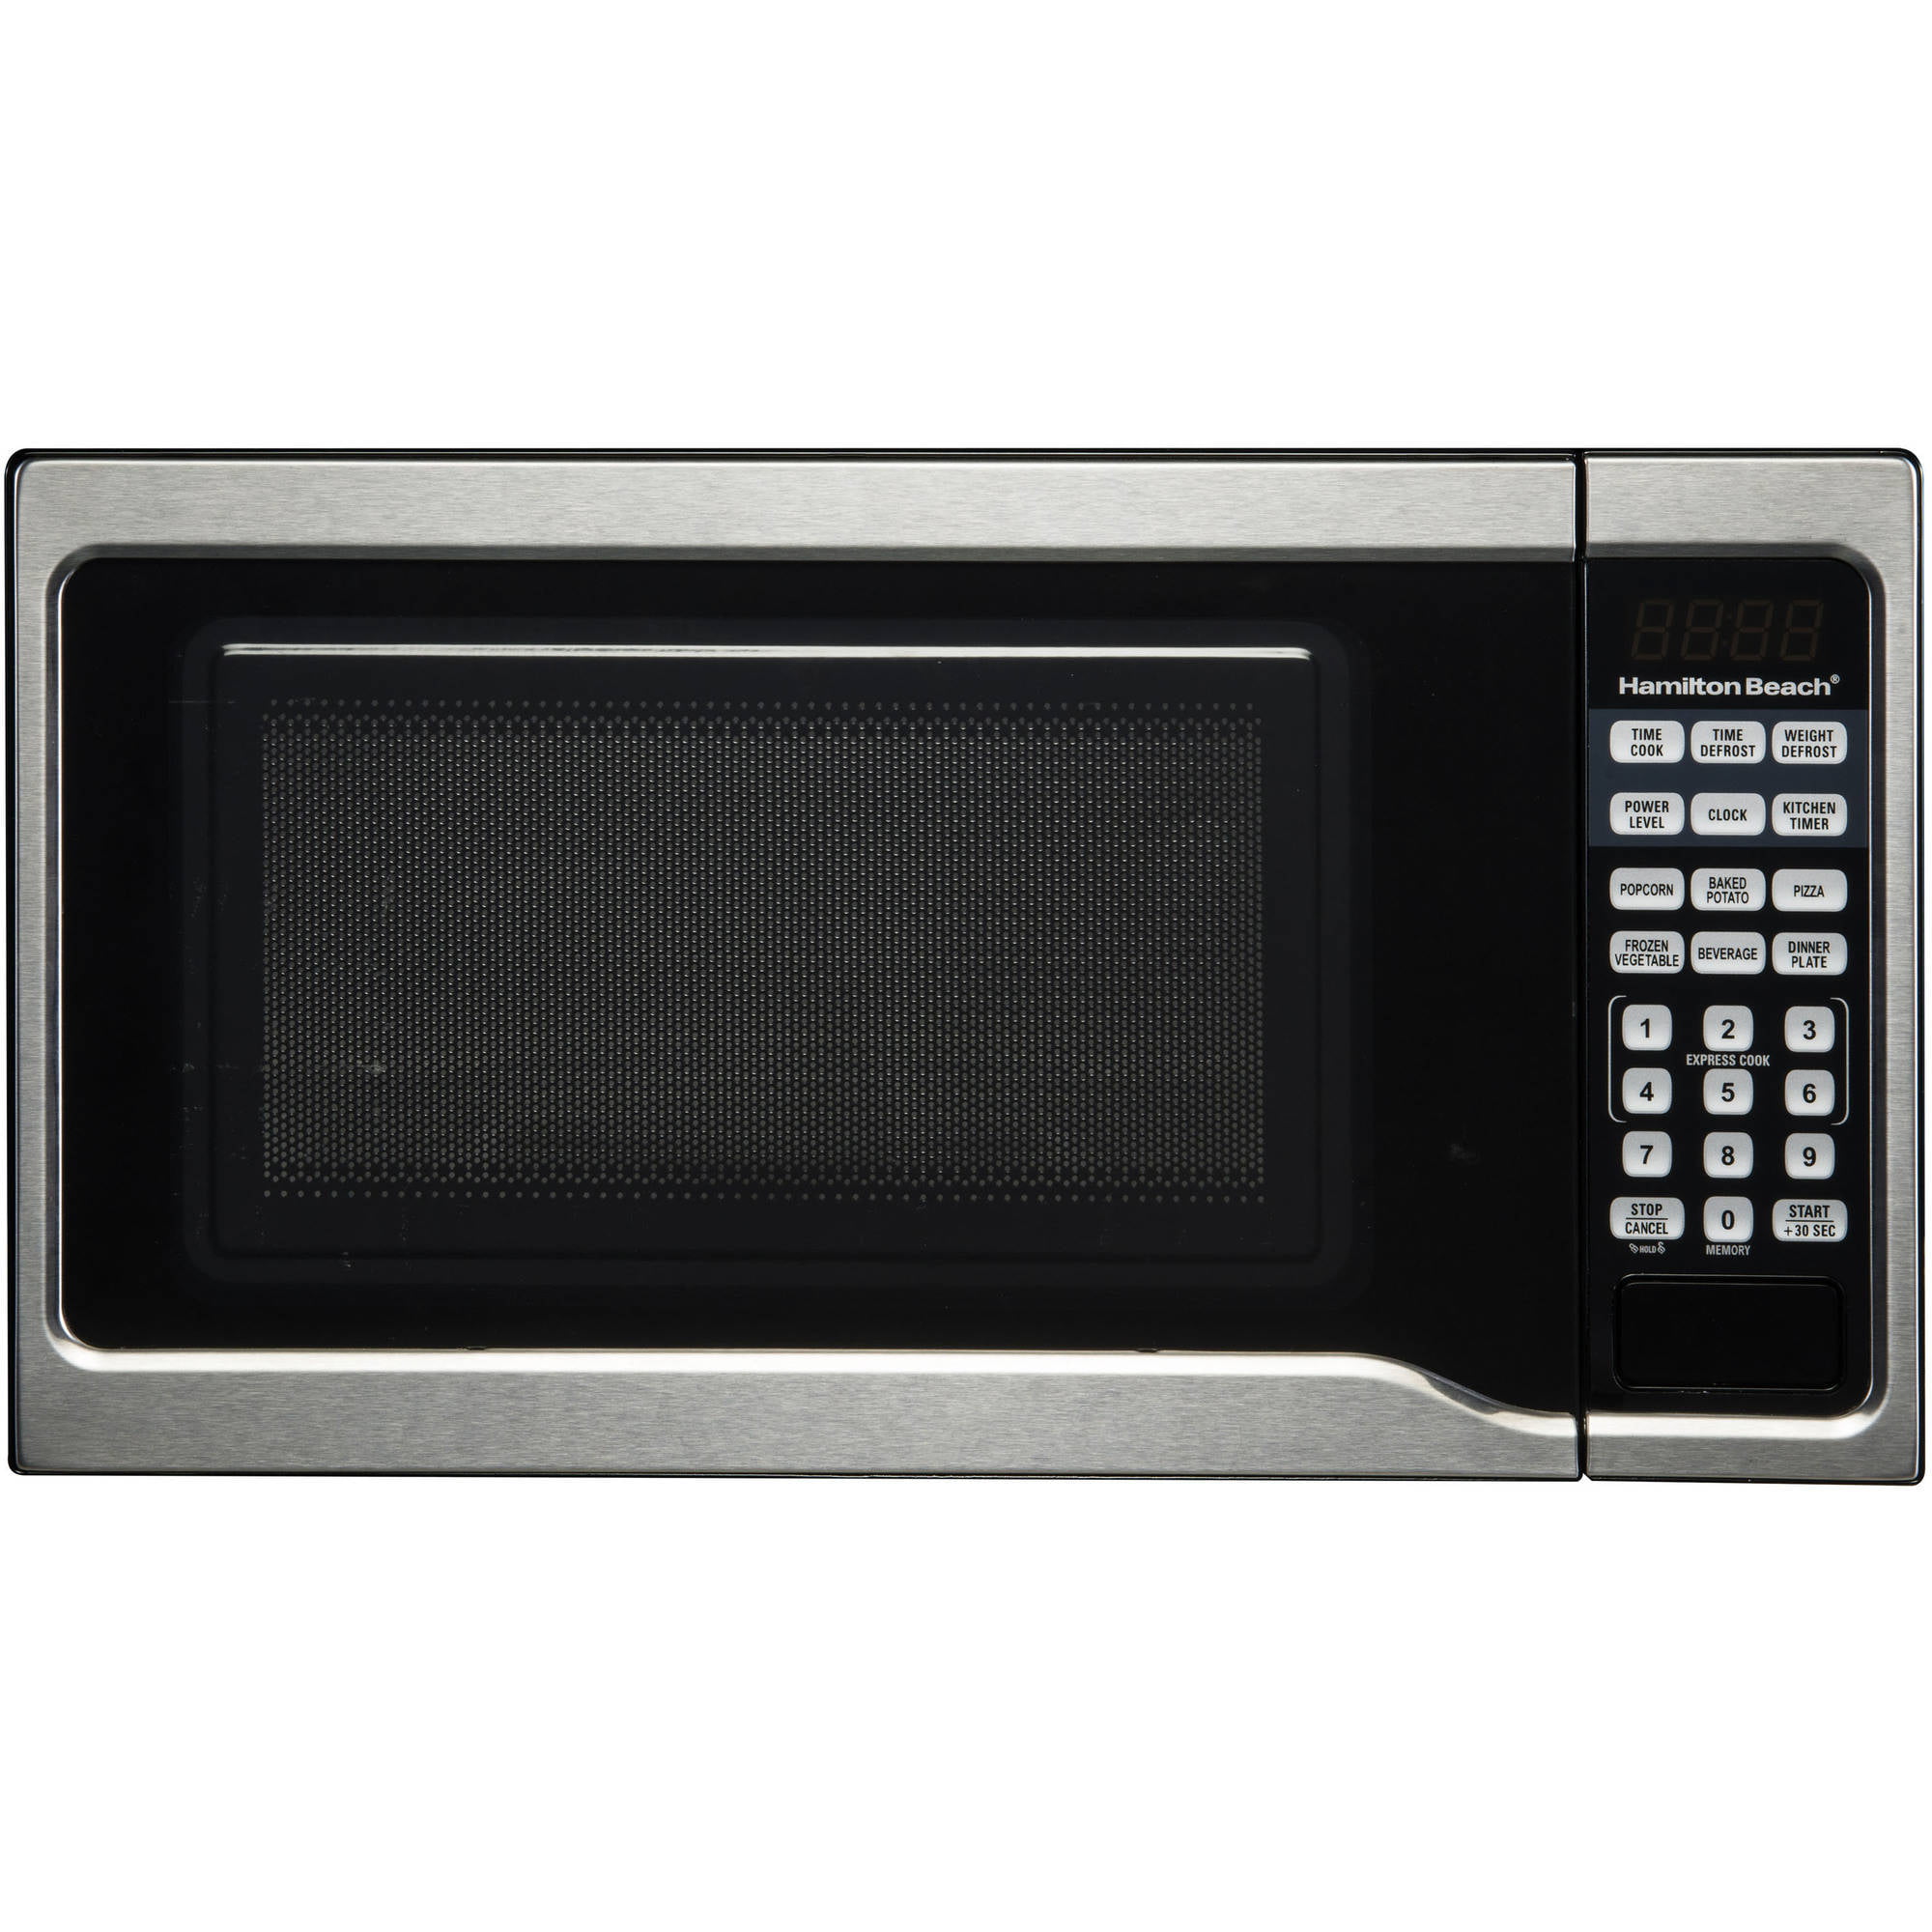 Hamilton Beach 0.7 Cu Ft Countertop Microwave Oven Stainless Steel 700W Black 